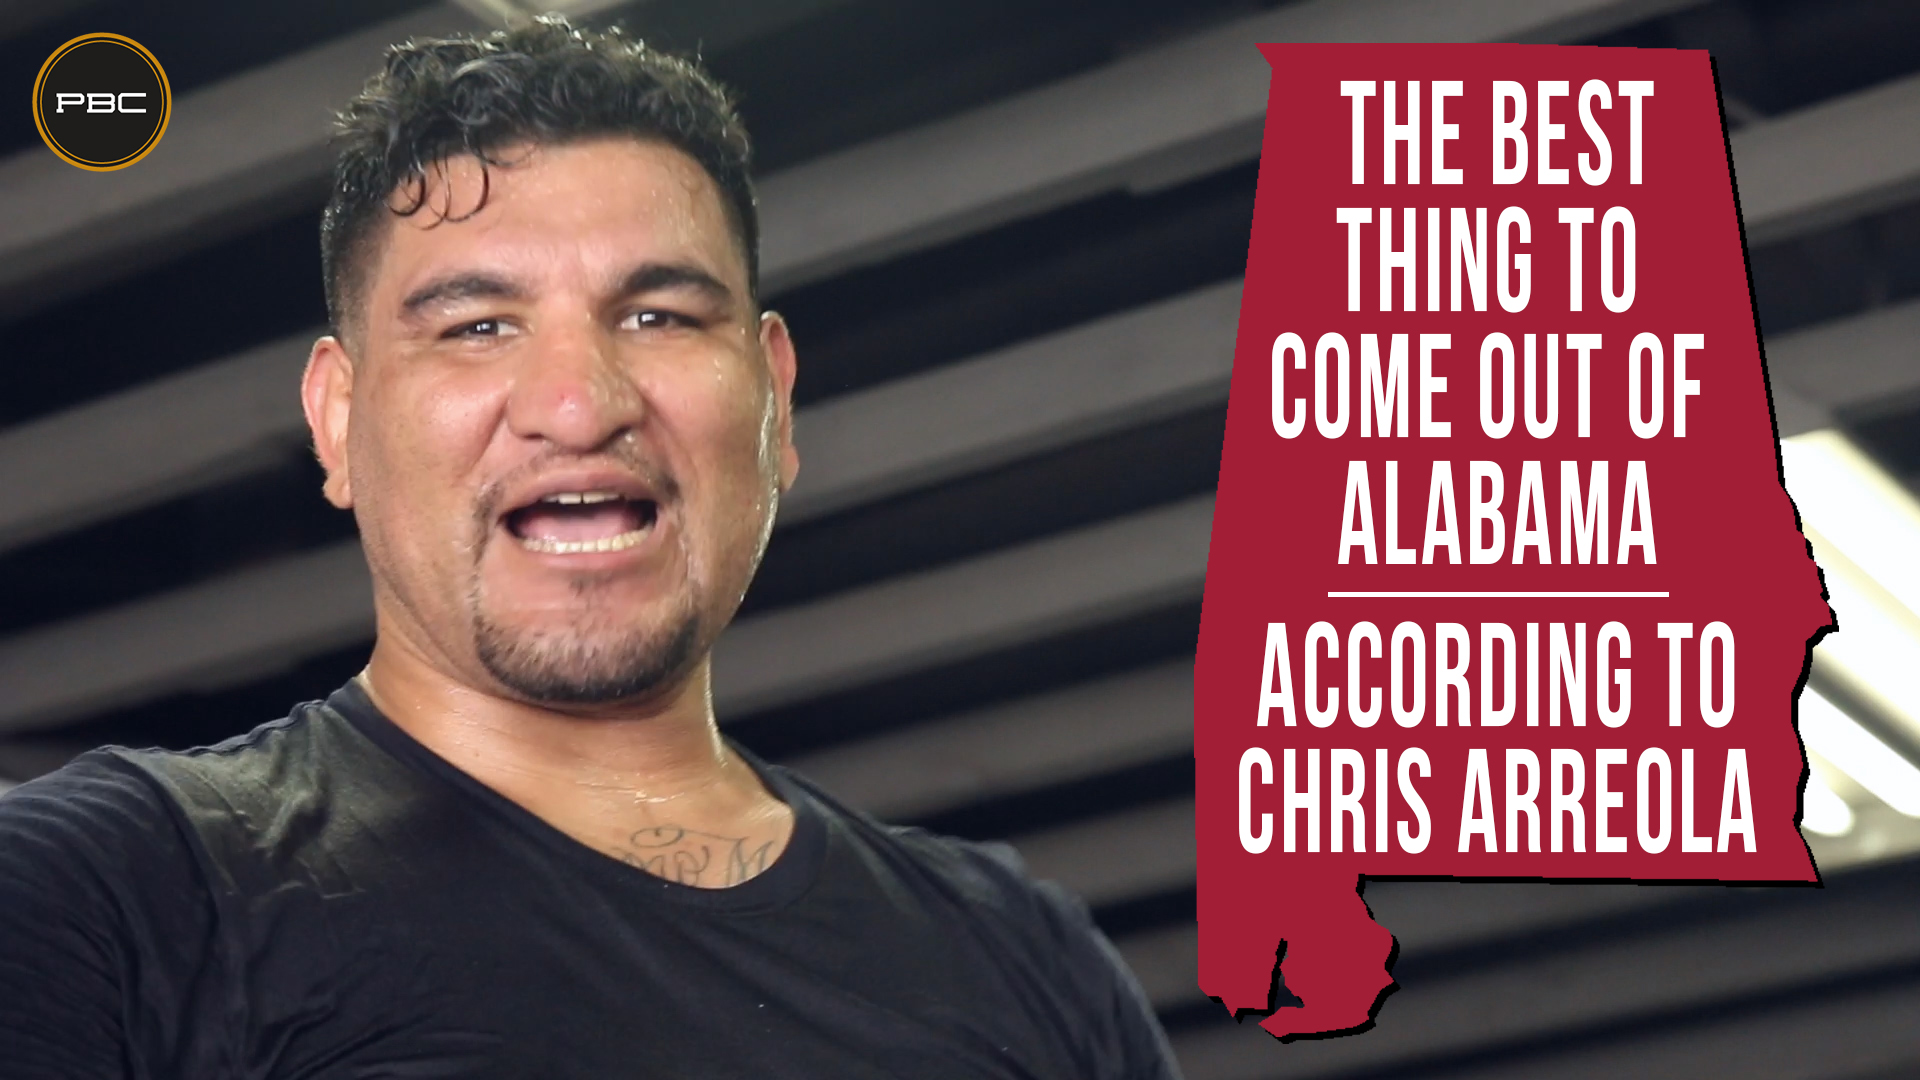 According to Arreola: The Best Thing to Come Out of Alabama1920 x 1080